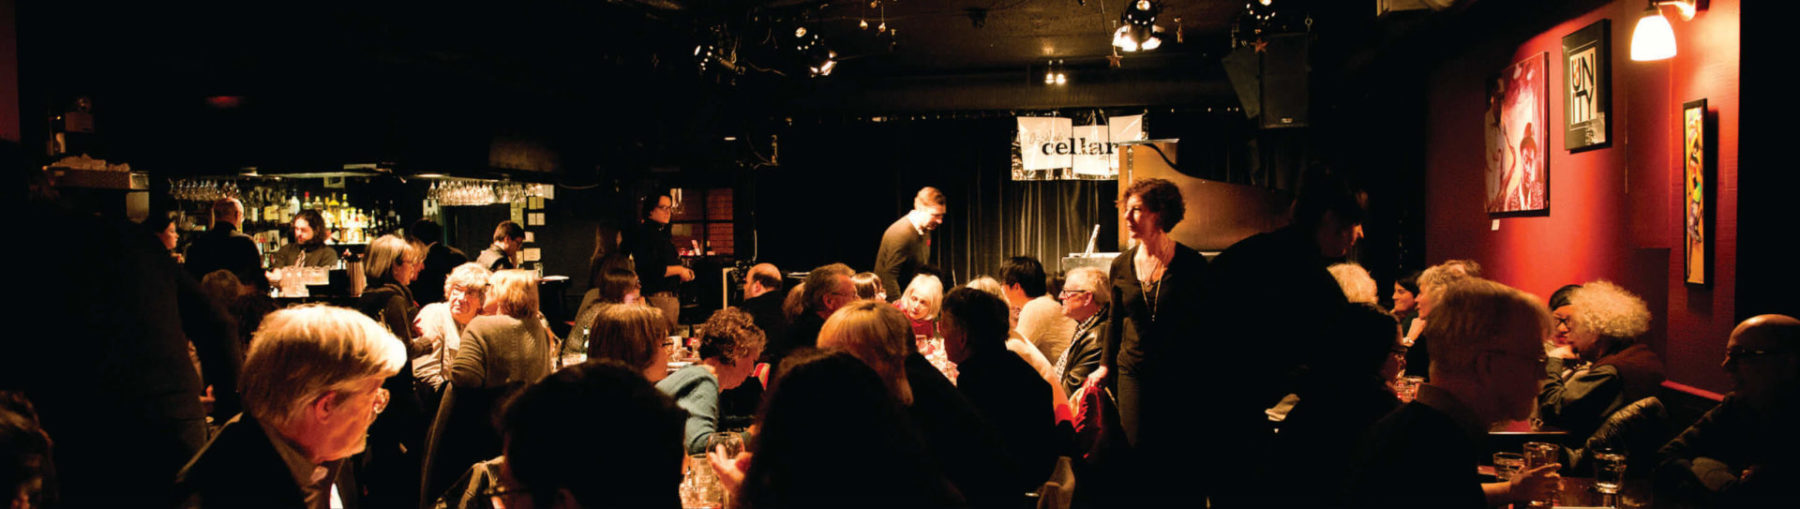 Audiences at The Cellar